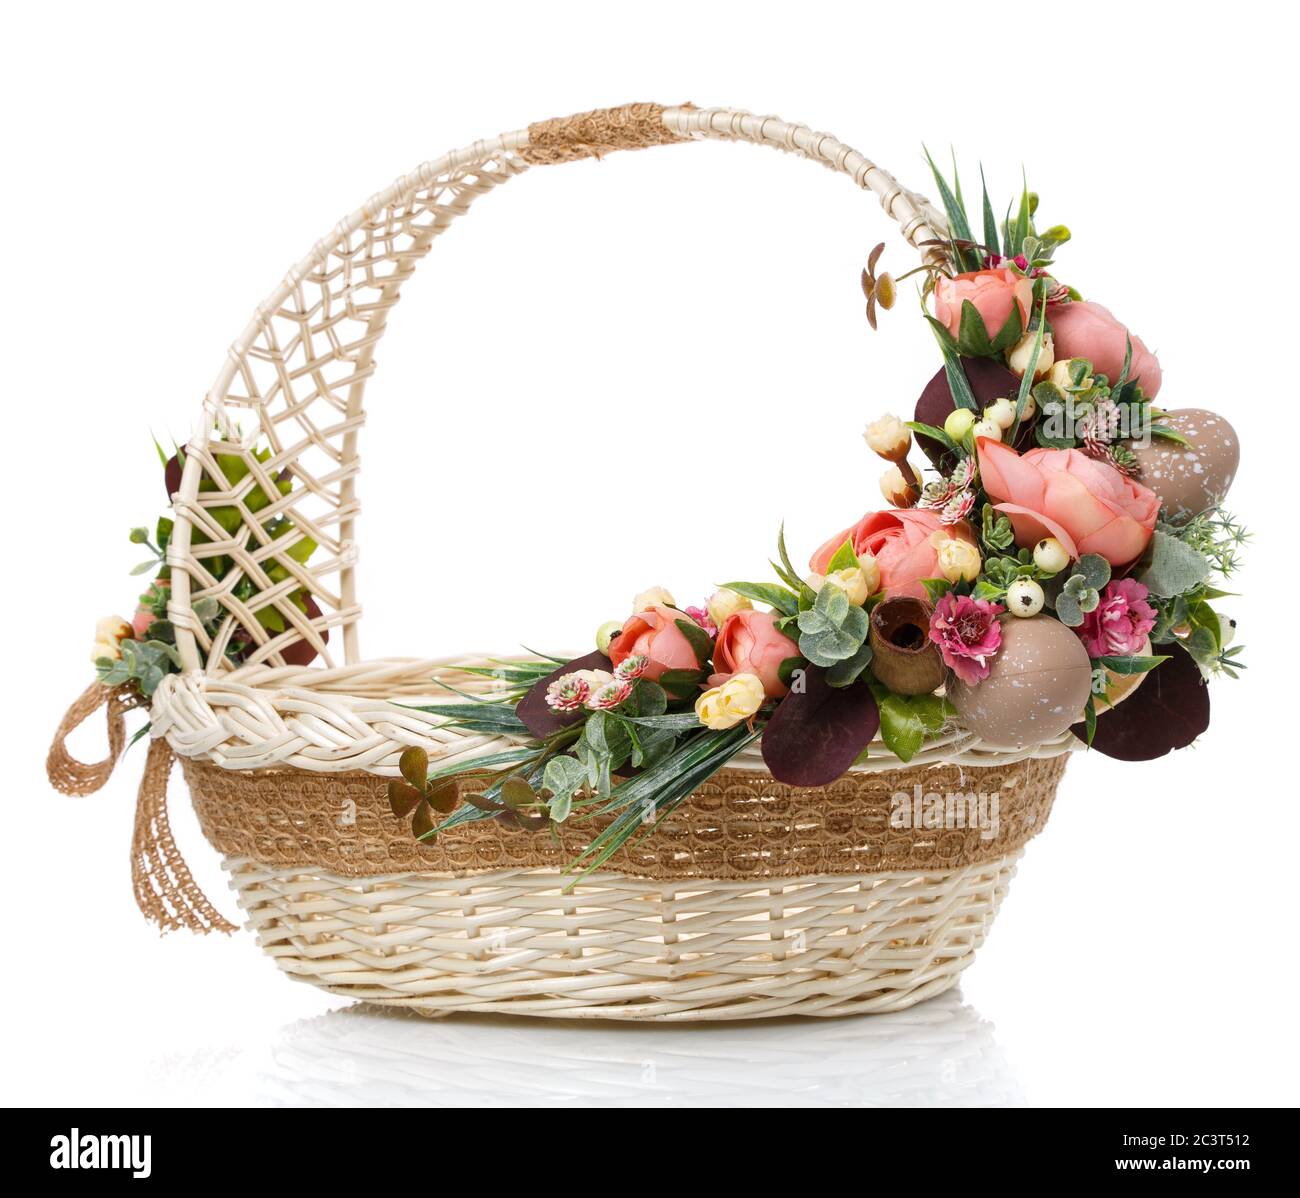 Wicker design baskets are decorated with a floral arrangement for Easter.  On a white background Stock Photo - Alamy